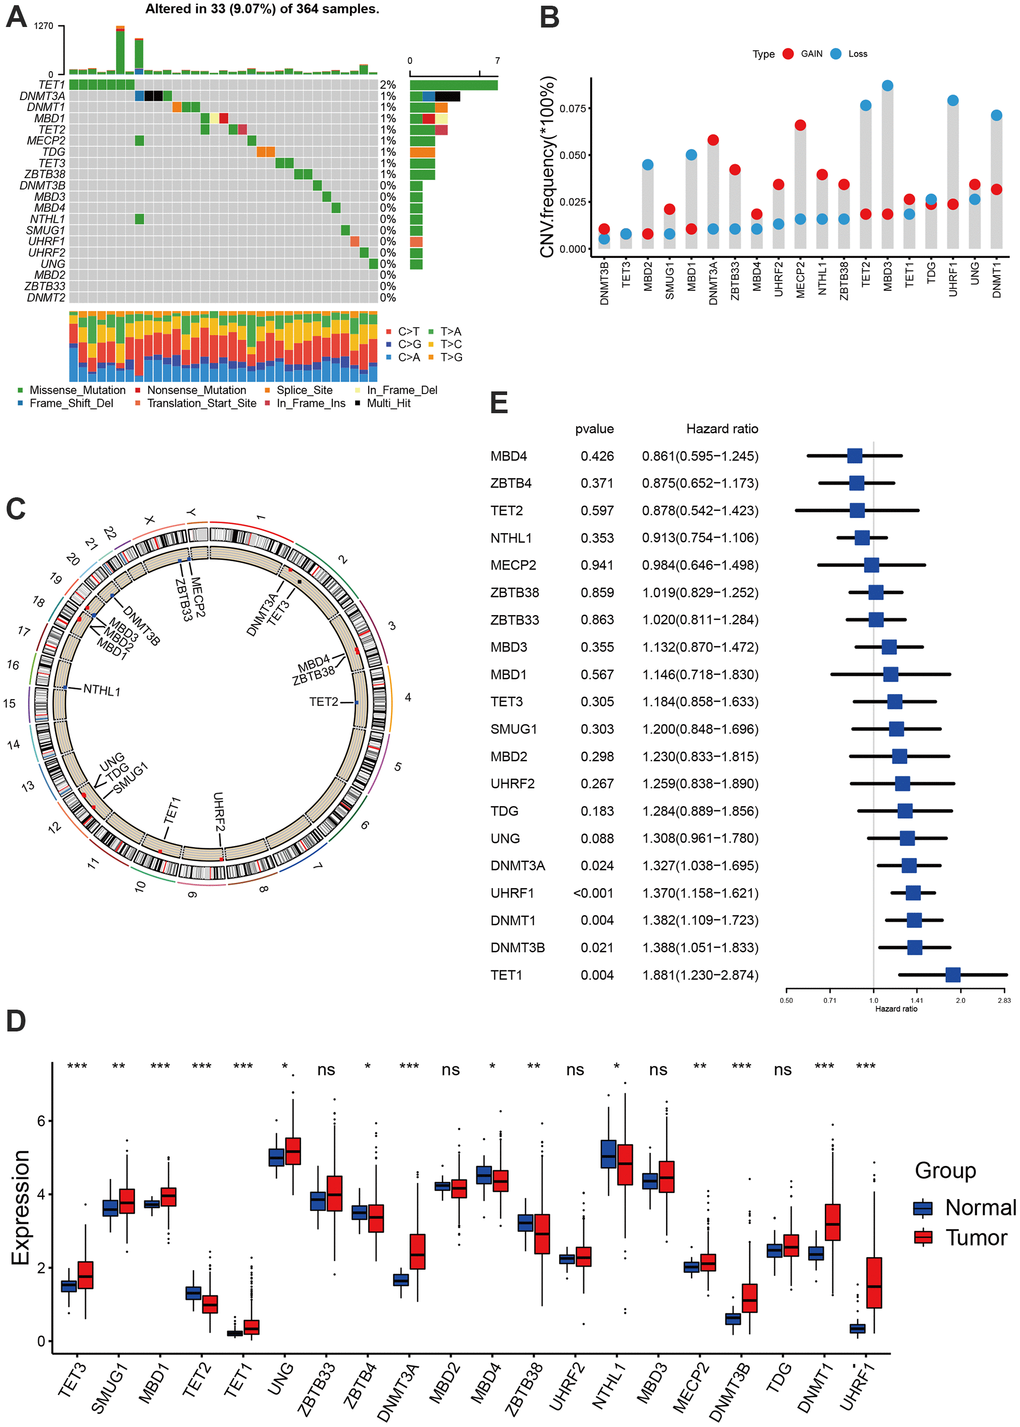 Landscape of DNA methylation regulators in hepatocellular carcinoma. (A) The mutation landscape of 20 DNA methylation regulators in TCGA-LIHC cohort. (B) The Copy number variation frequency of 20 DNA methylation regulators. (C) The position of the 20 regulators in the chromosome. (D) Expression of 20 regulators in tumor and normal samples based on TCGA-cohort. (E) Survival analyses for the 20 regulator genes using univariate Cox regression model. All data analyses were based on the TCGA-LIHC cohort. CNV, copy number variation. Ns, not significant. *P 